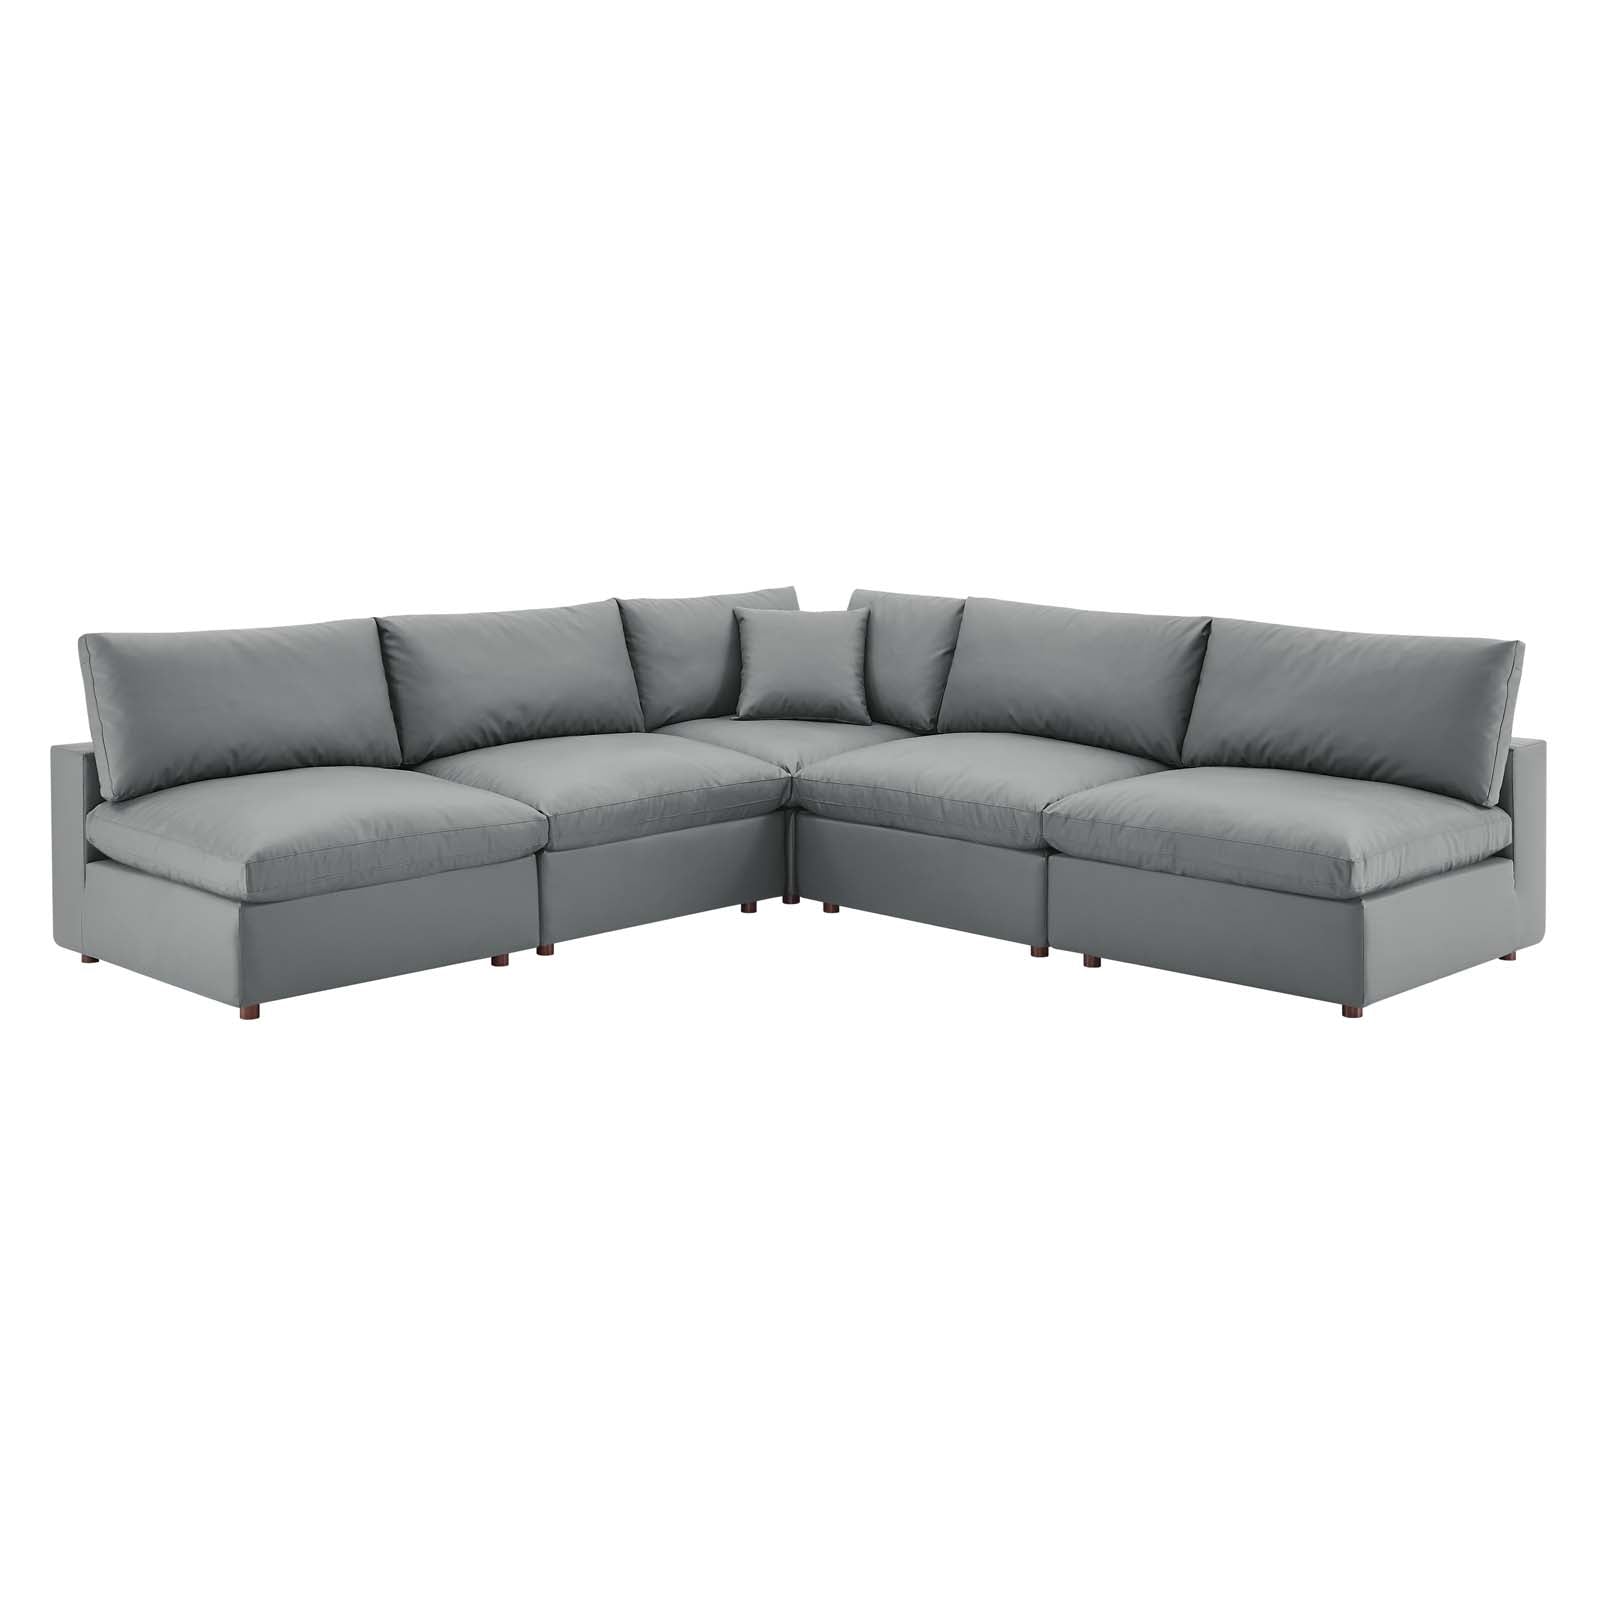 Modway Sectional Sofas - Commix Down Filled Overstuffed Vegan Leather 5 Pieces Sectional Sofa Gray